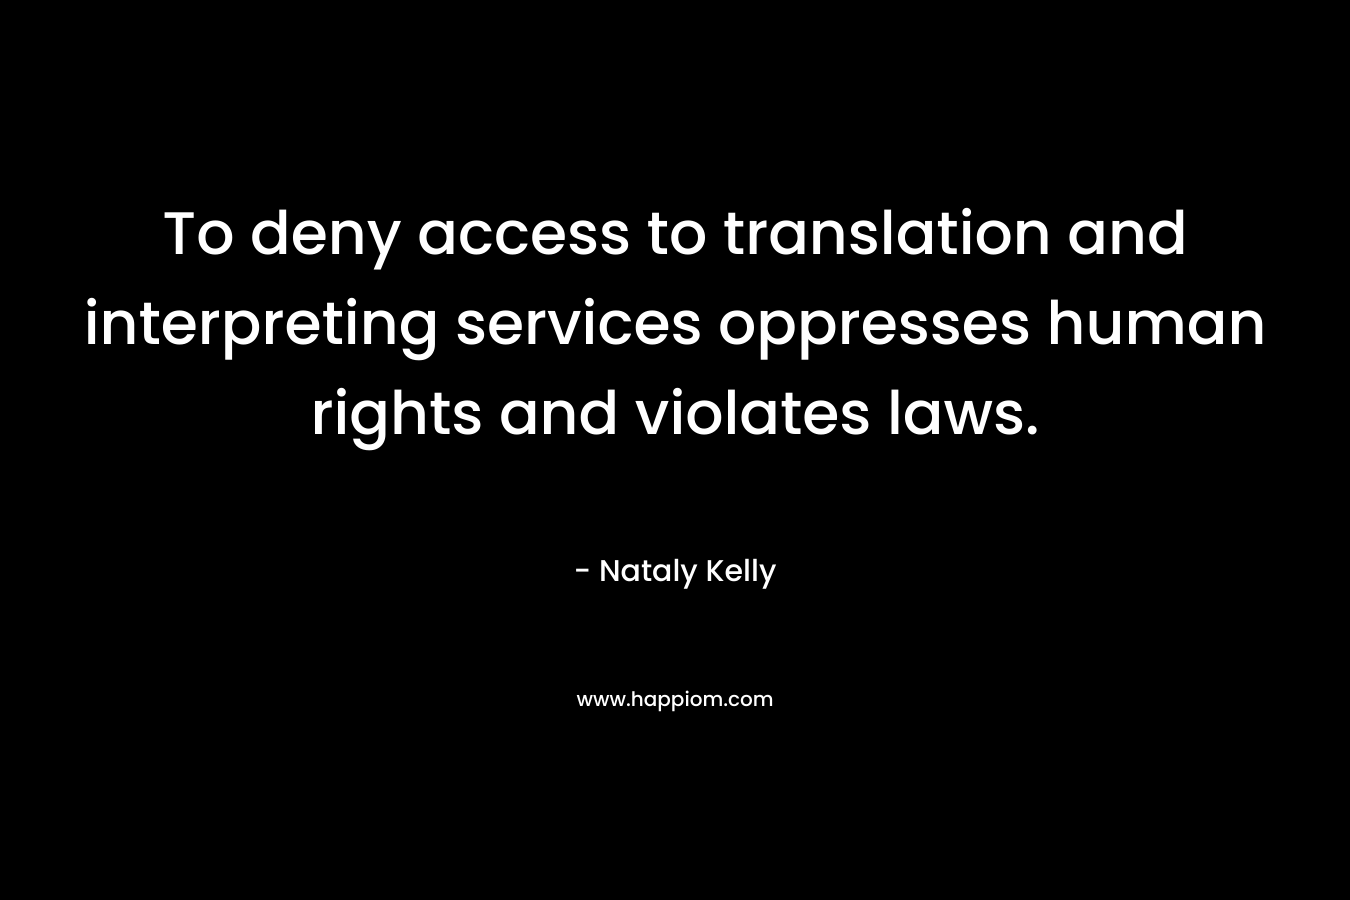 To deny access to translation and interpreting services oppresses human rights and violates laws.